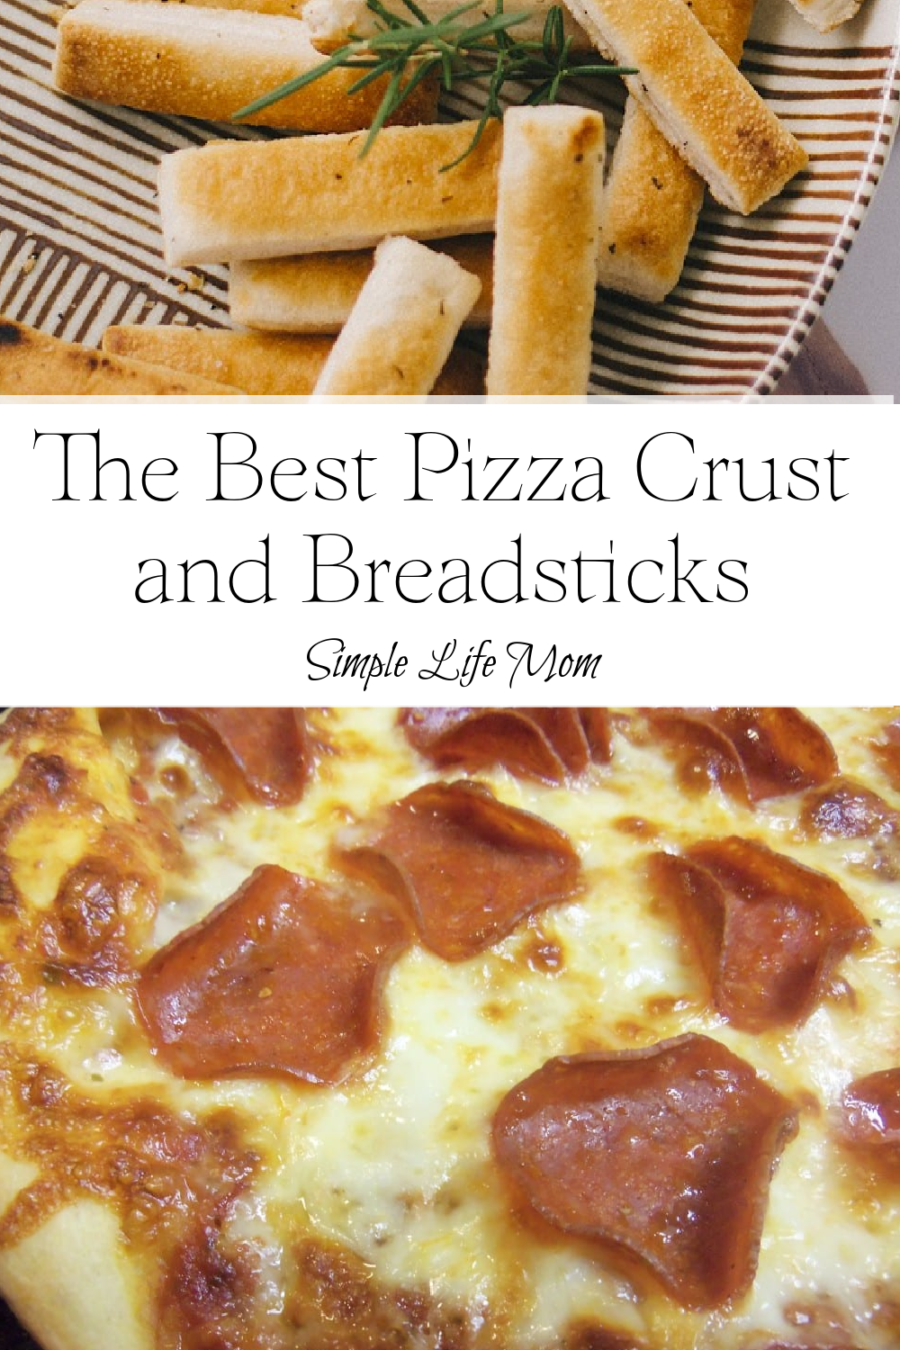 The Best Pizza Crust and Breadsticks from Simple Life Mom